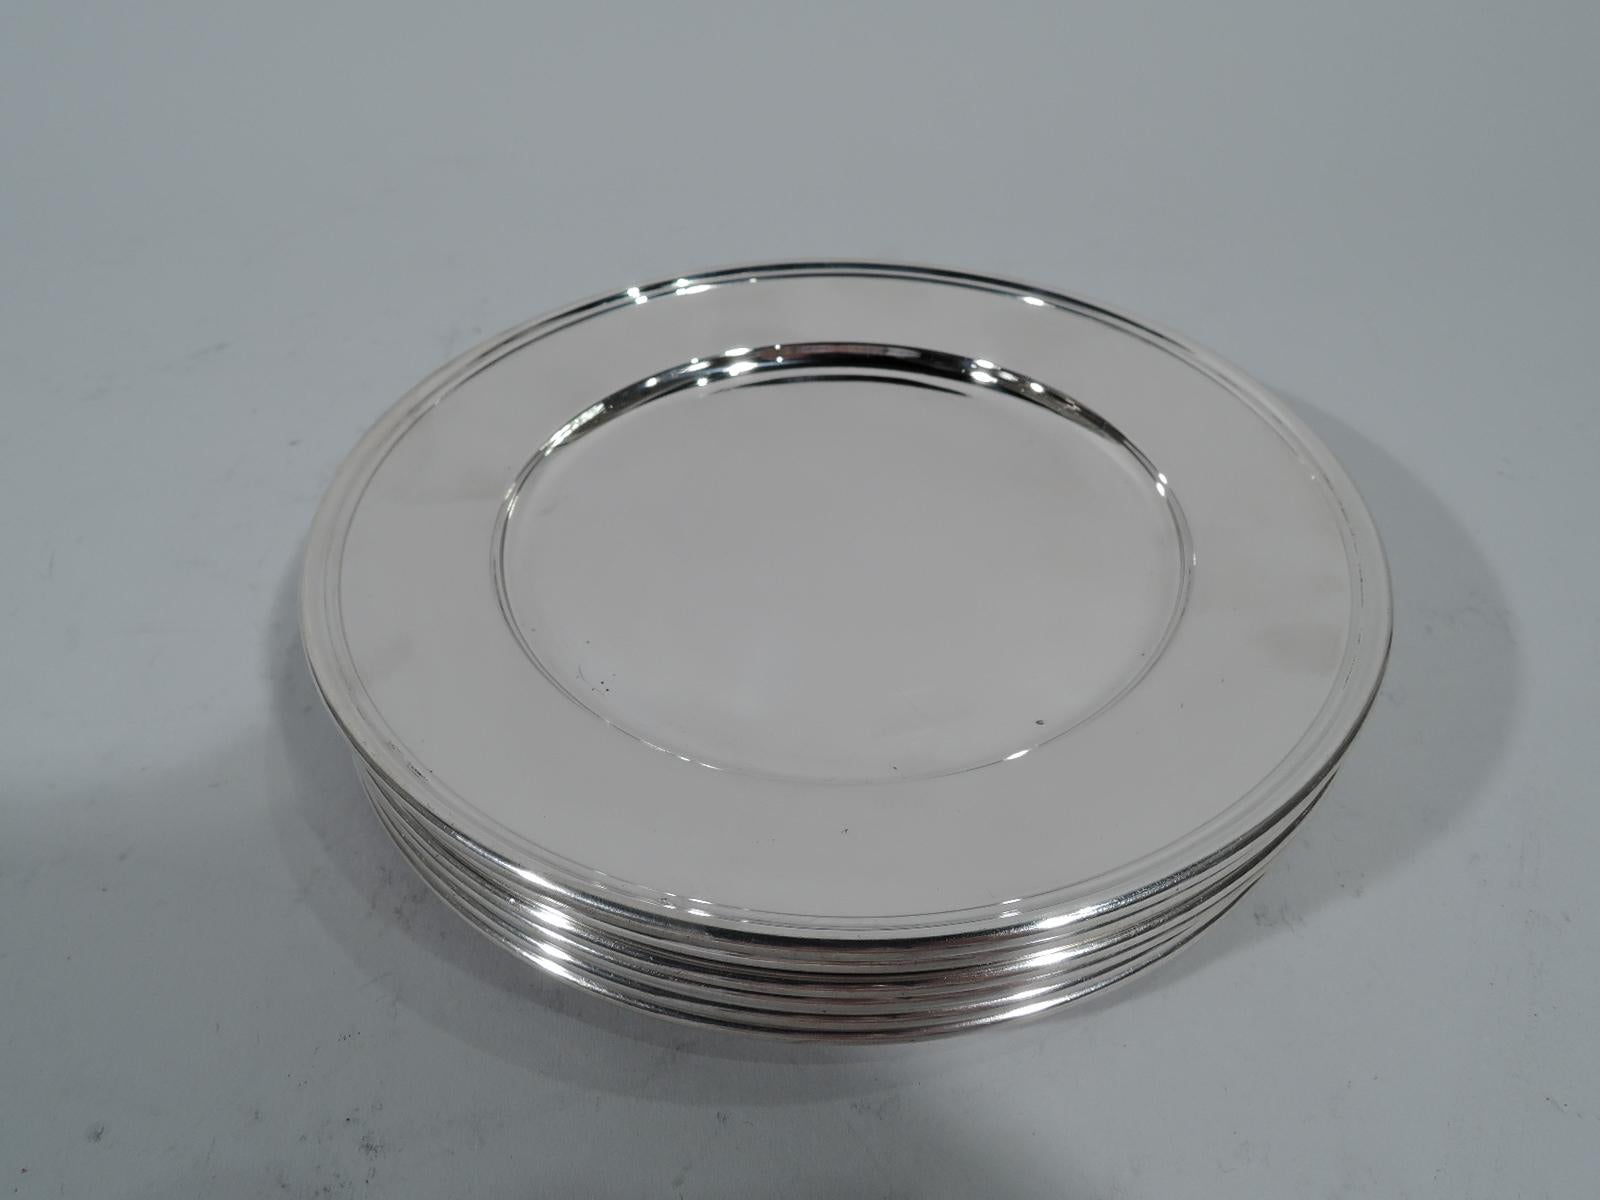 Set of eight modern sterling silver bread and butter plates. Made by Tiffany & Co. in New York. Each: circular well and molded rim. Spare and functional. Hallmark includes pattern no. 20064 (first produced in 1922), order no. 6101, and director’s